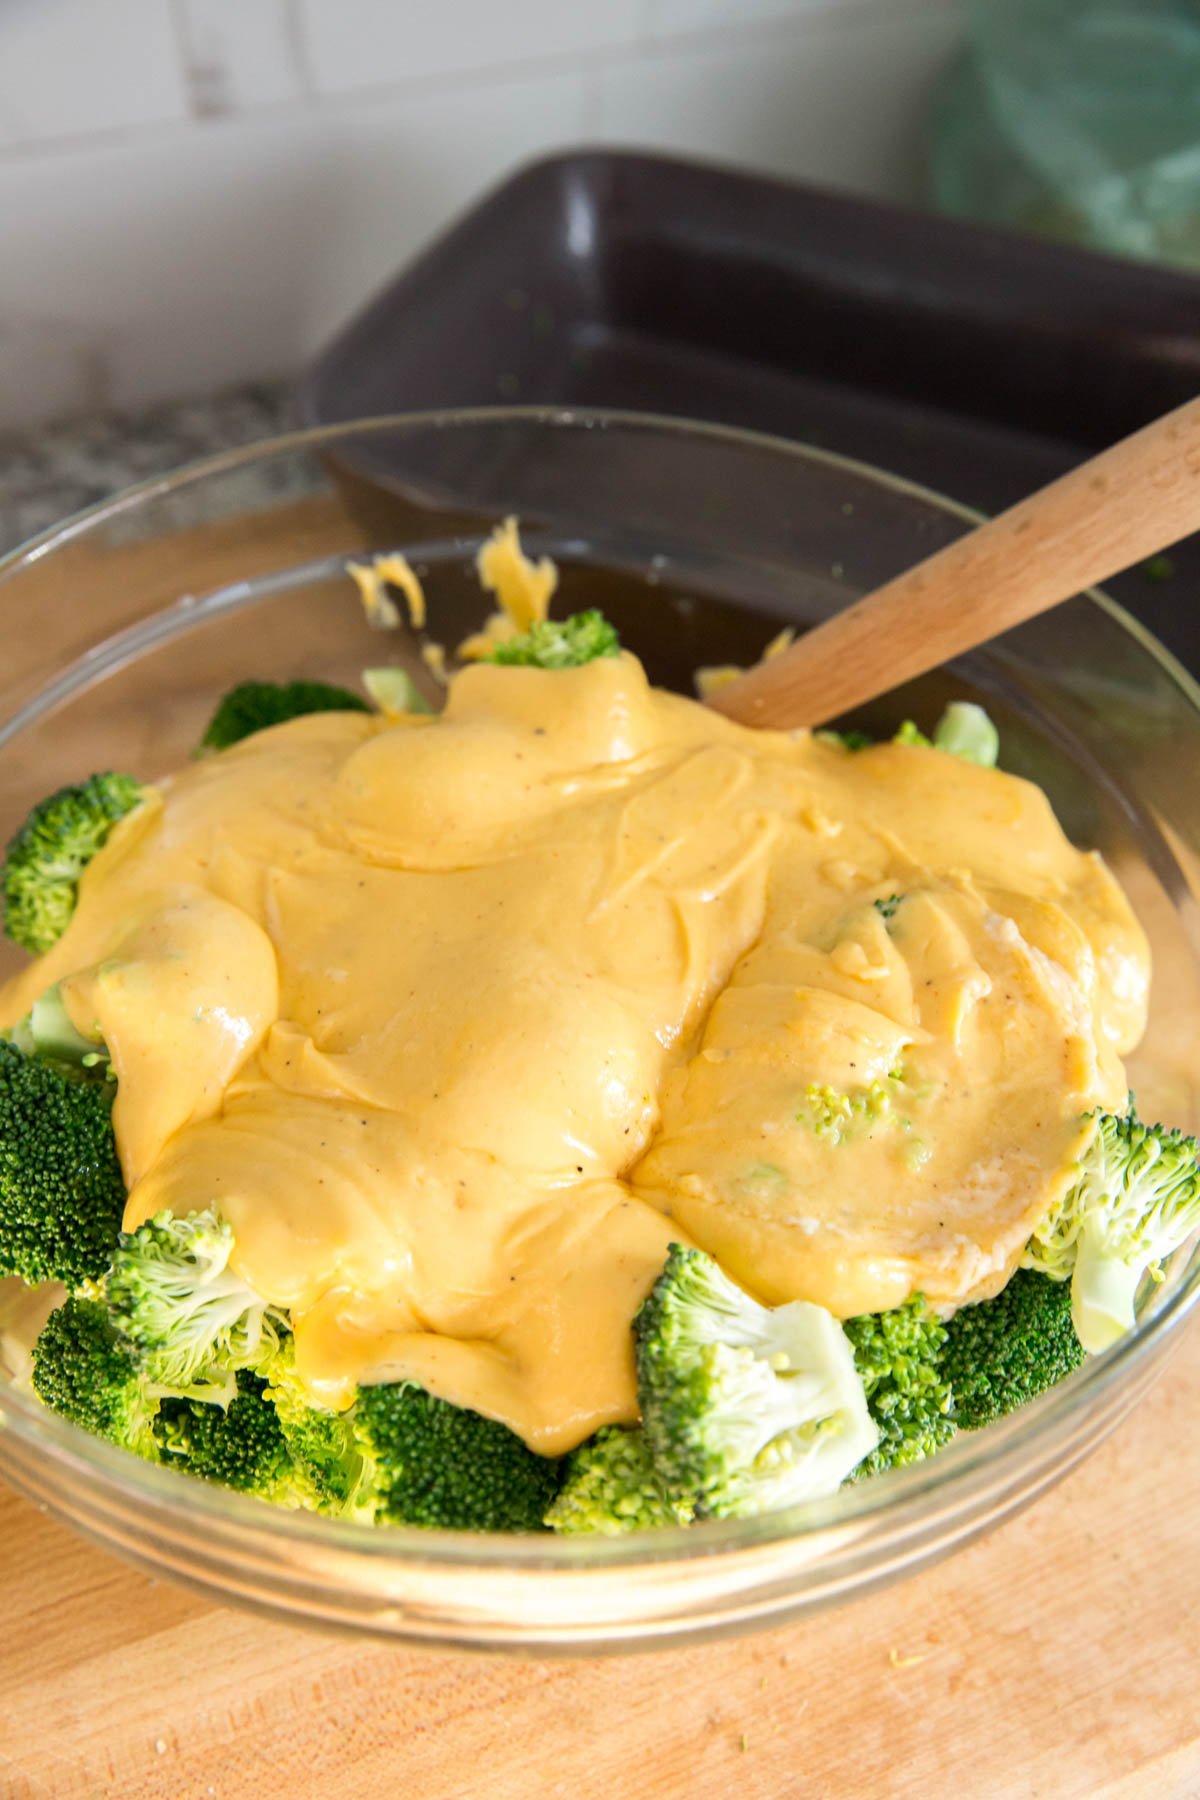 brocolli and cheese sauce, clear glass bowl, wooden spoon